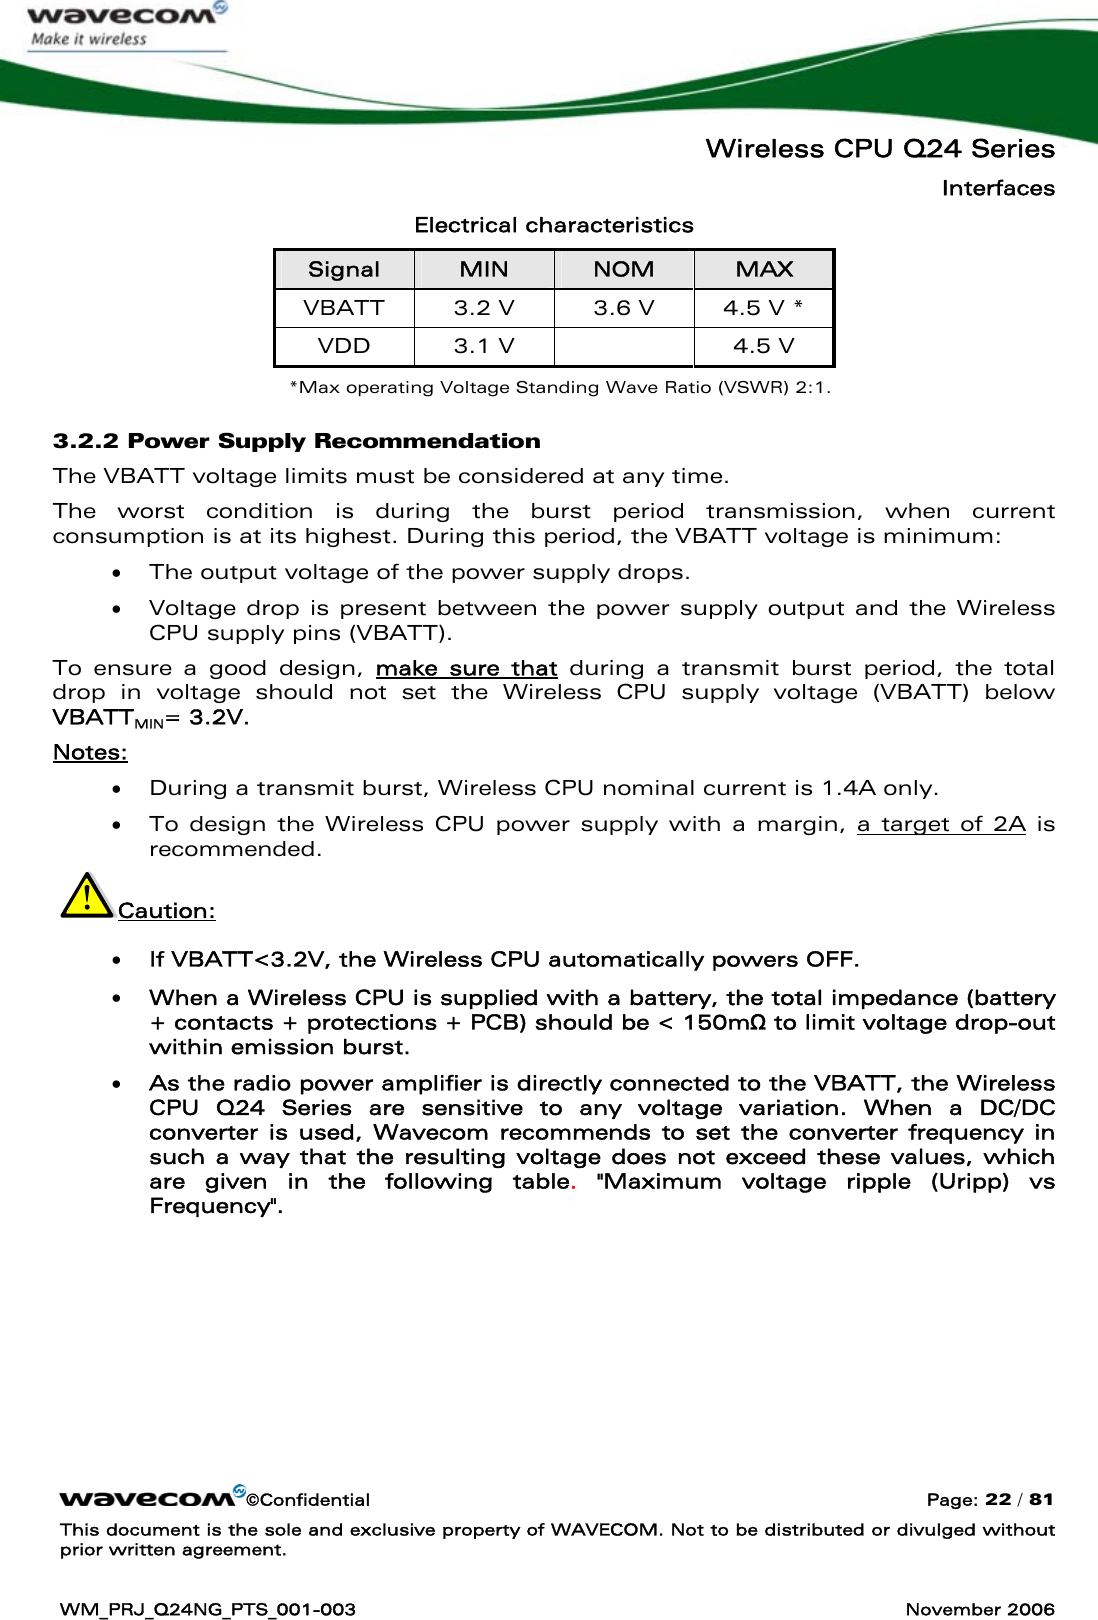   Wireless CPU Q24 Series Interfaces ©Confidential  Page: 22 / 81 This document is the sole and exclusive property of WAVECOM. Not to be distributed or divulged without prior written agreement.  WM_PRJ_Q24NG_PTS_001-003  November 2006  Electrical characteristics Signal  MIN  NOM  MAX VBATT  3.2 V   3.6 V  4.5 V * VDD  3.1 V    4.5 V *Max operating Voltage Standing Wave Ratio (VSWR) 2:1. 3.2.2 Power Supply Recommendation  The VBATT voltage limits must be considered at any time. The worst condition is during the burst period transmission, when current consumption is at its highest. During this period, the VBATT voltage is minimum:  • The output voltage of the power supply drops.  • Voltage drop is present between the power supply output and the Wireless CPU supply pins (VBATT). To ensure a good design, make sure that during a transmit burst period, the total drop in voltage should not set the Wireless CPU supply voltage (VBATT) below VBATTMIN= 3.2V.  Notes:  • During a transmit burst, Wireless CPU nominal current is 1.4A only. • To design the Wireless CPU power supply with a margin, a target of 2A is recommended.   Caution: • If VBATT&lt;3.2V, the Wireless CPU automatically powers OFF. • When a Wireless CPU is supplied with a battery, the total impedance (battery + contacts + protections + PCB) should be &lt; 150mΩ to limit voltage drop-out within emission burst. • As the radio power amplifier is directly connected to the VBATT, the Wireless CPU Q24 Series are sensitive to any voltage variation. When a DC/DC converter is used, Wavecom recommends to set the converter frequency in such a way that the resulting voltage does not exceed these values, which are given in the following table.  &quot;Maximum voltage ripple (Uripp) vs Frequency&quot;.  